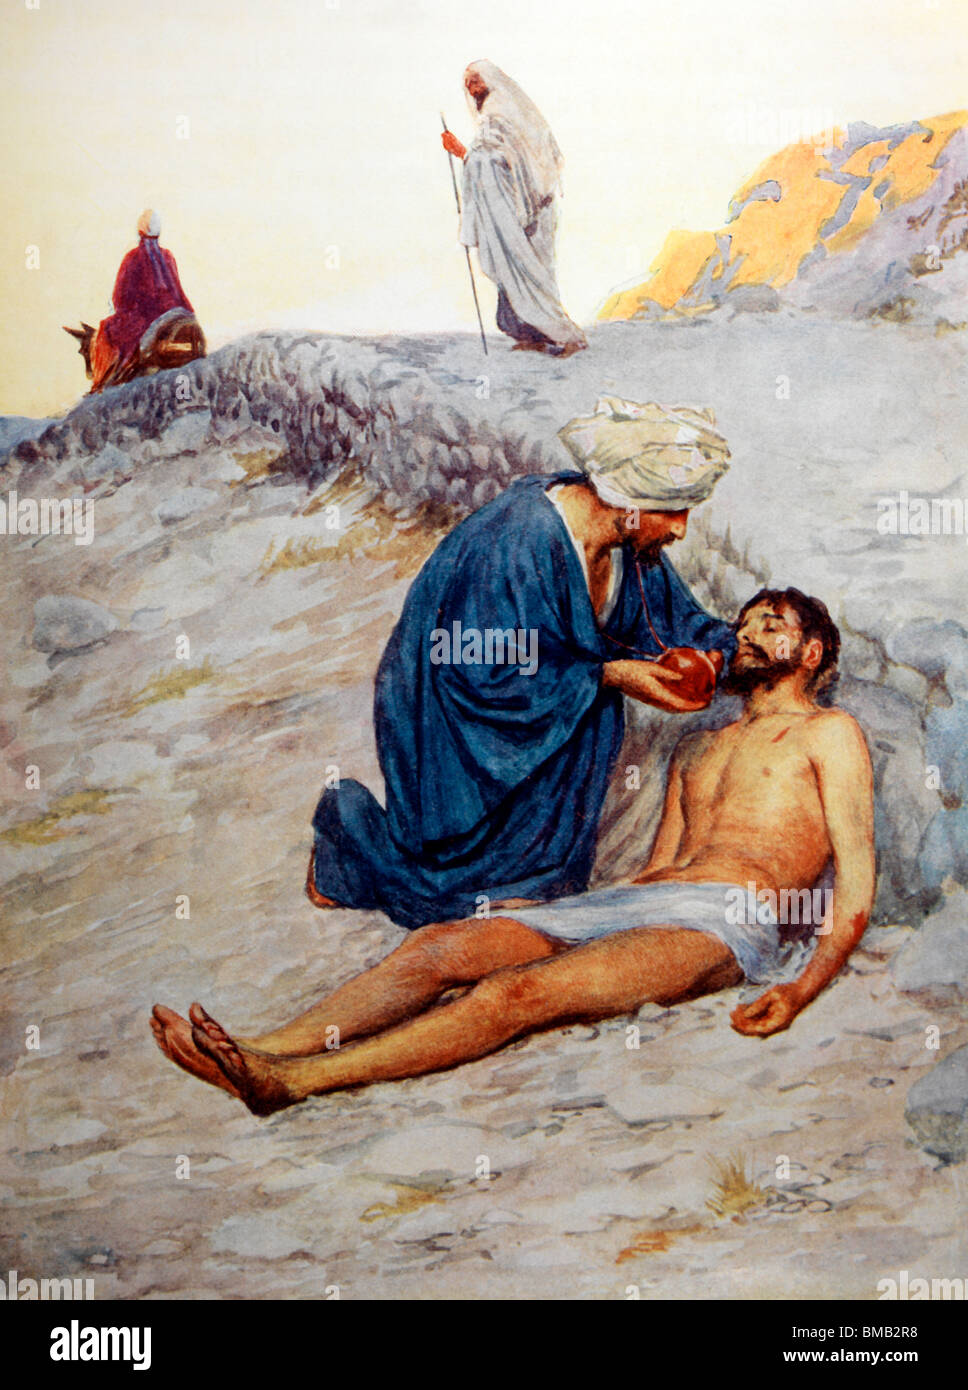 The Good Samaritan Helps The Jewish Man Who Has Been Robbed And Beaten Stock Photo